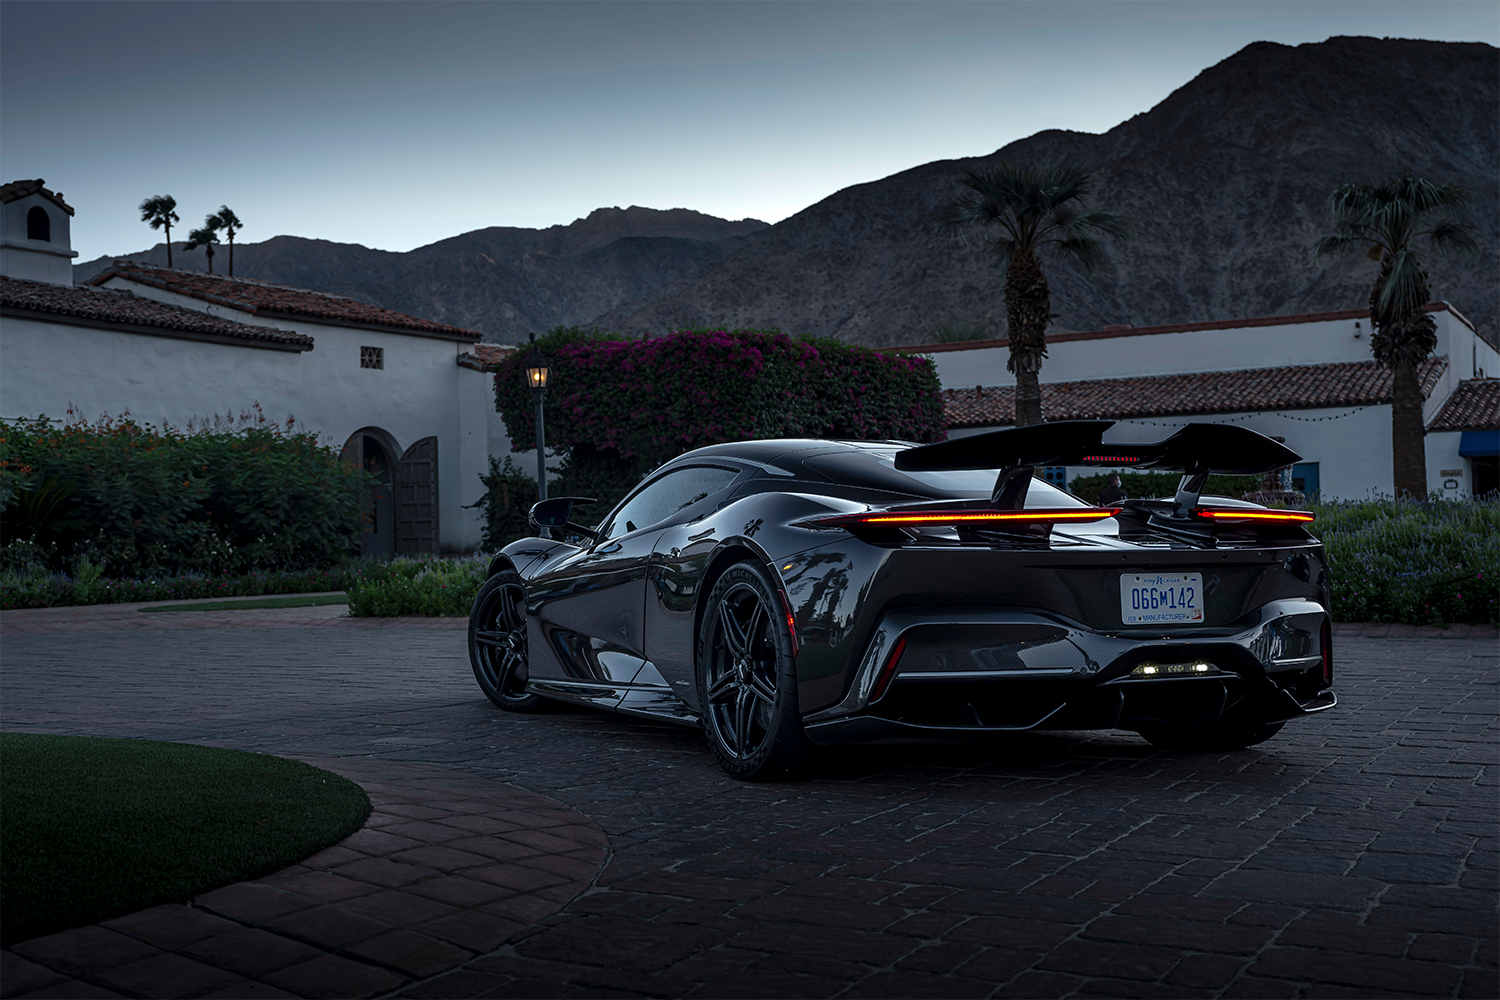 Automobili Pininfarina's new electric hypercar shown from the back in the United States at dusk